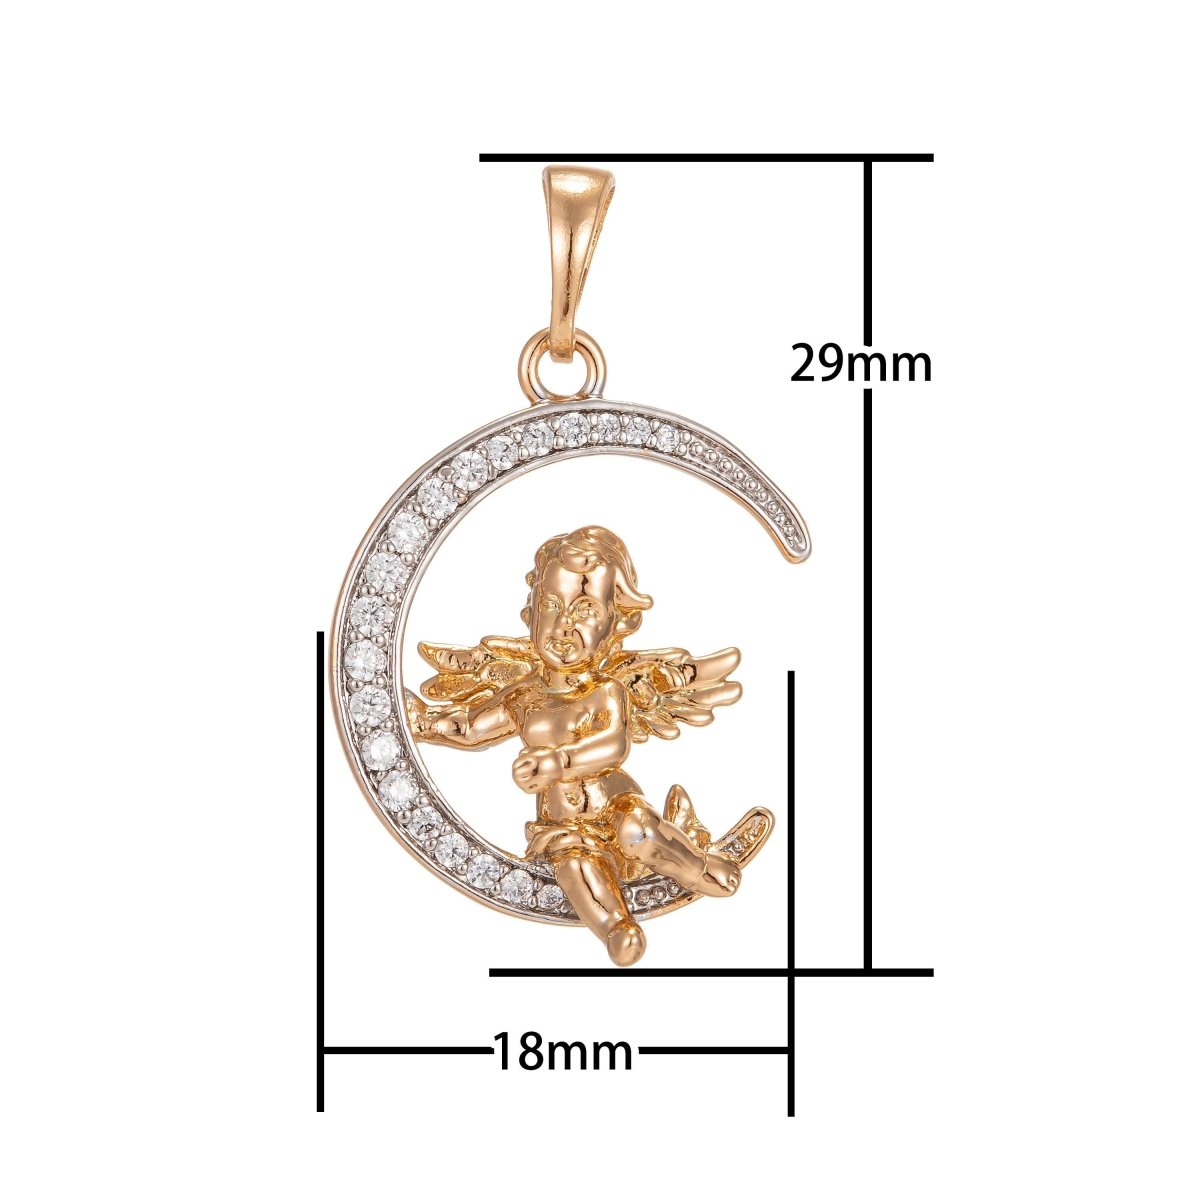 Cherub in the Moon Pendant Micro Pave Gold Moon Charm Necklace Moon Pendant in 18k Gold Filled Cherub Necklace Cubic Baby Angel Jewelry I-251 - DLUXCA